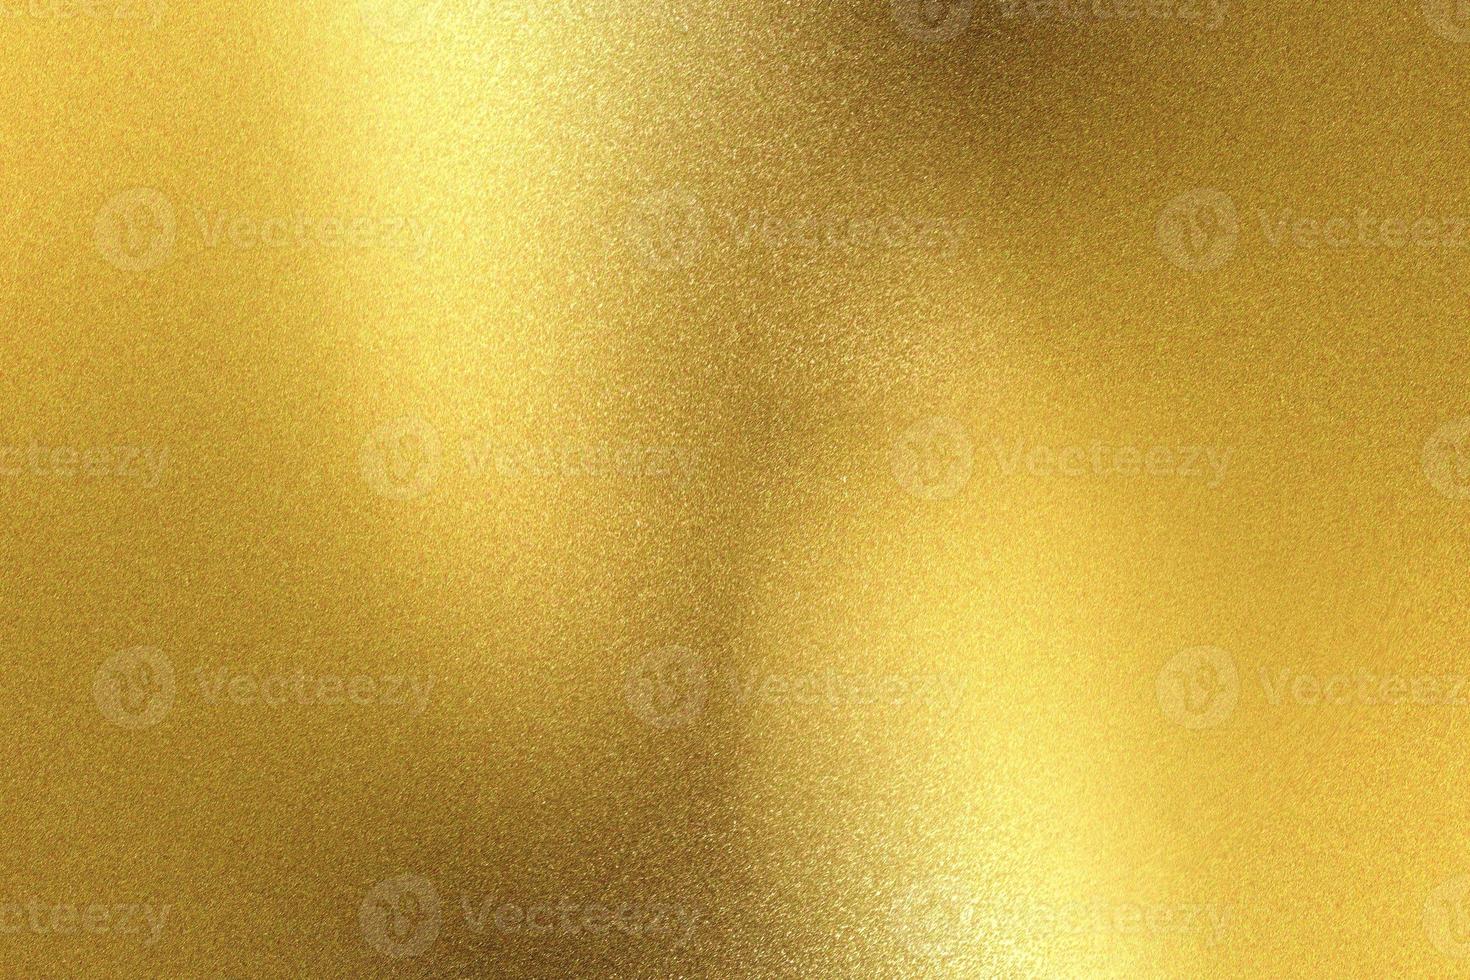 Glowing gold metallic wall surface, abstract background photo